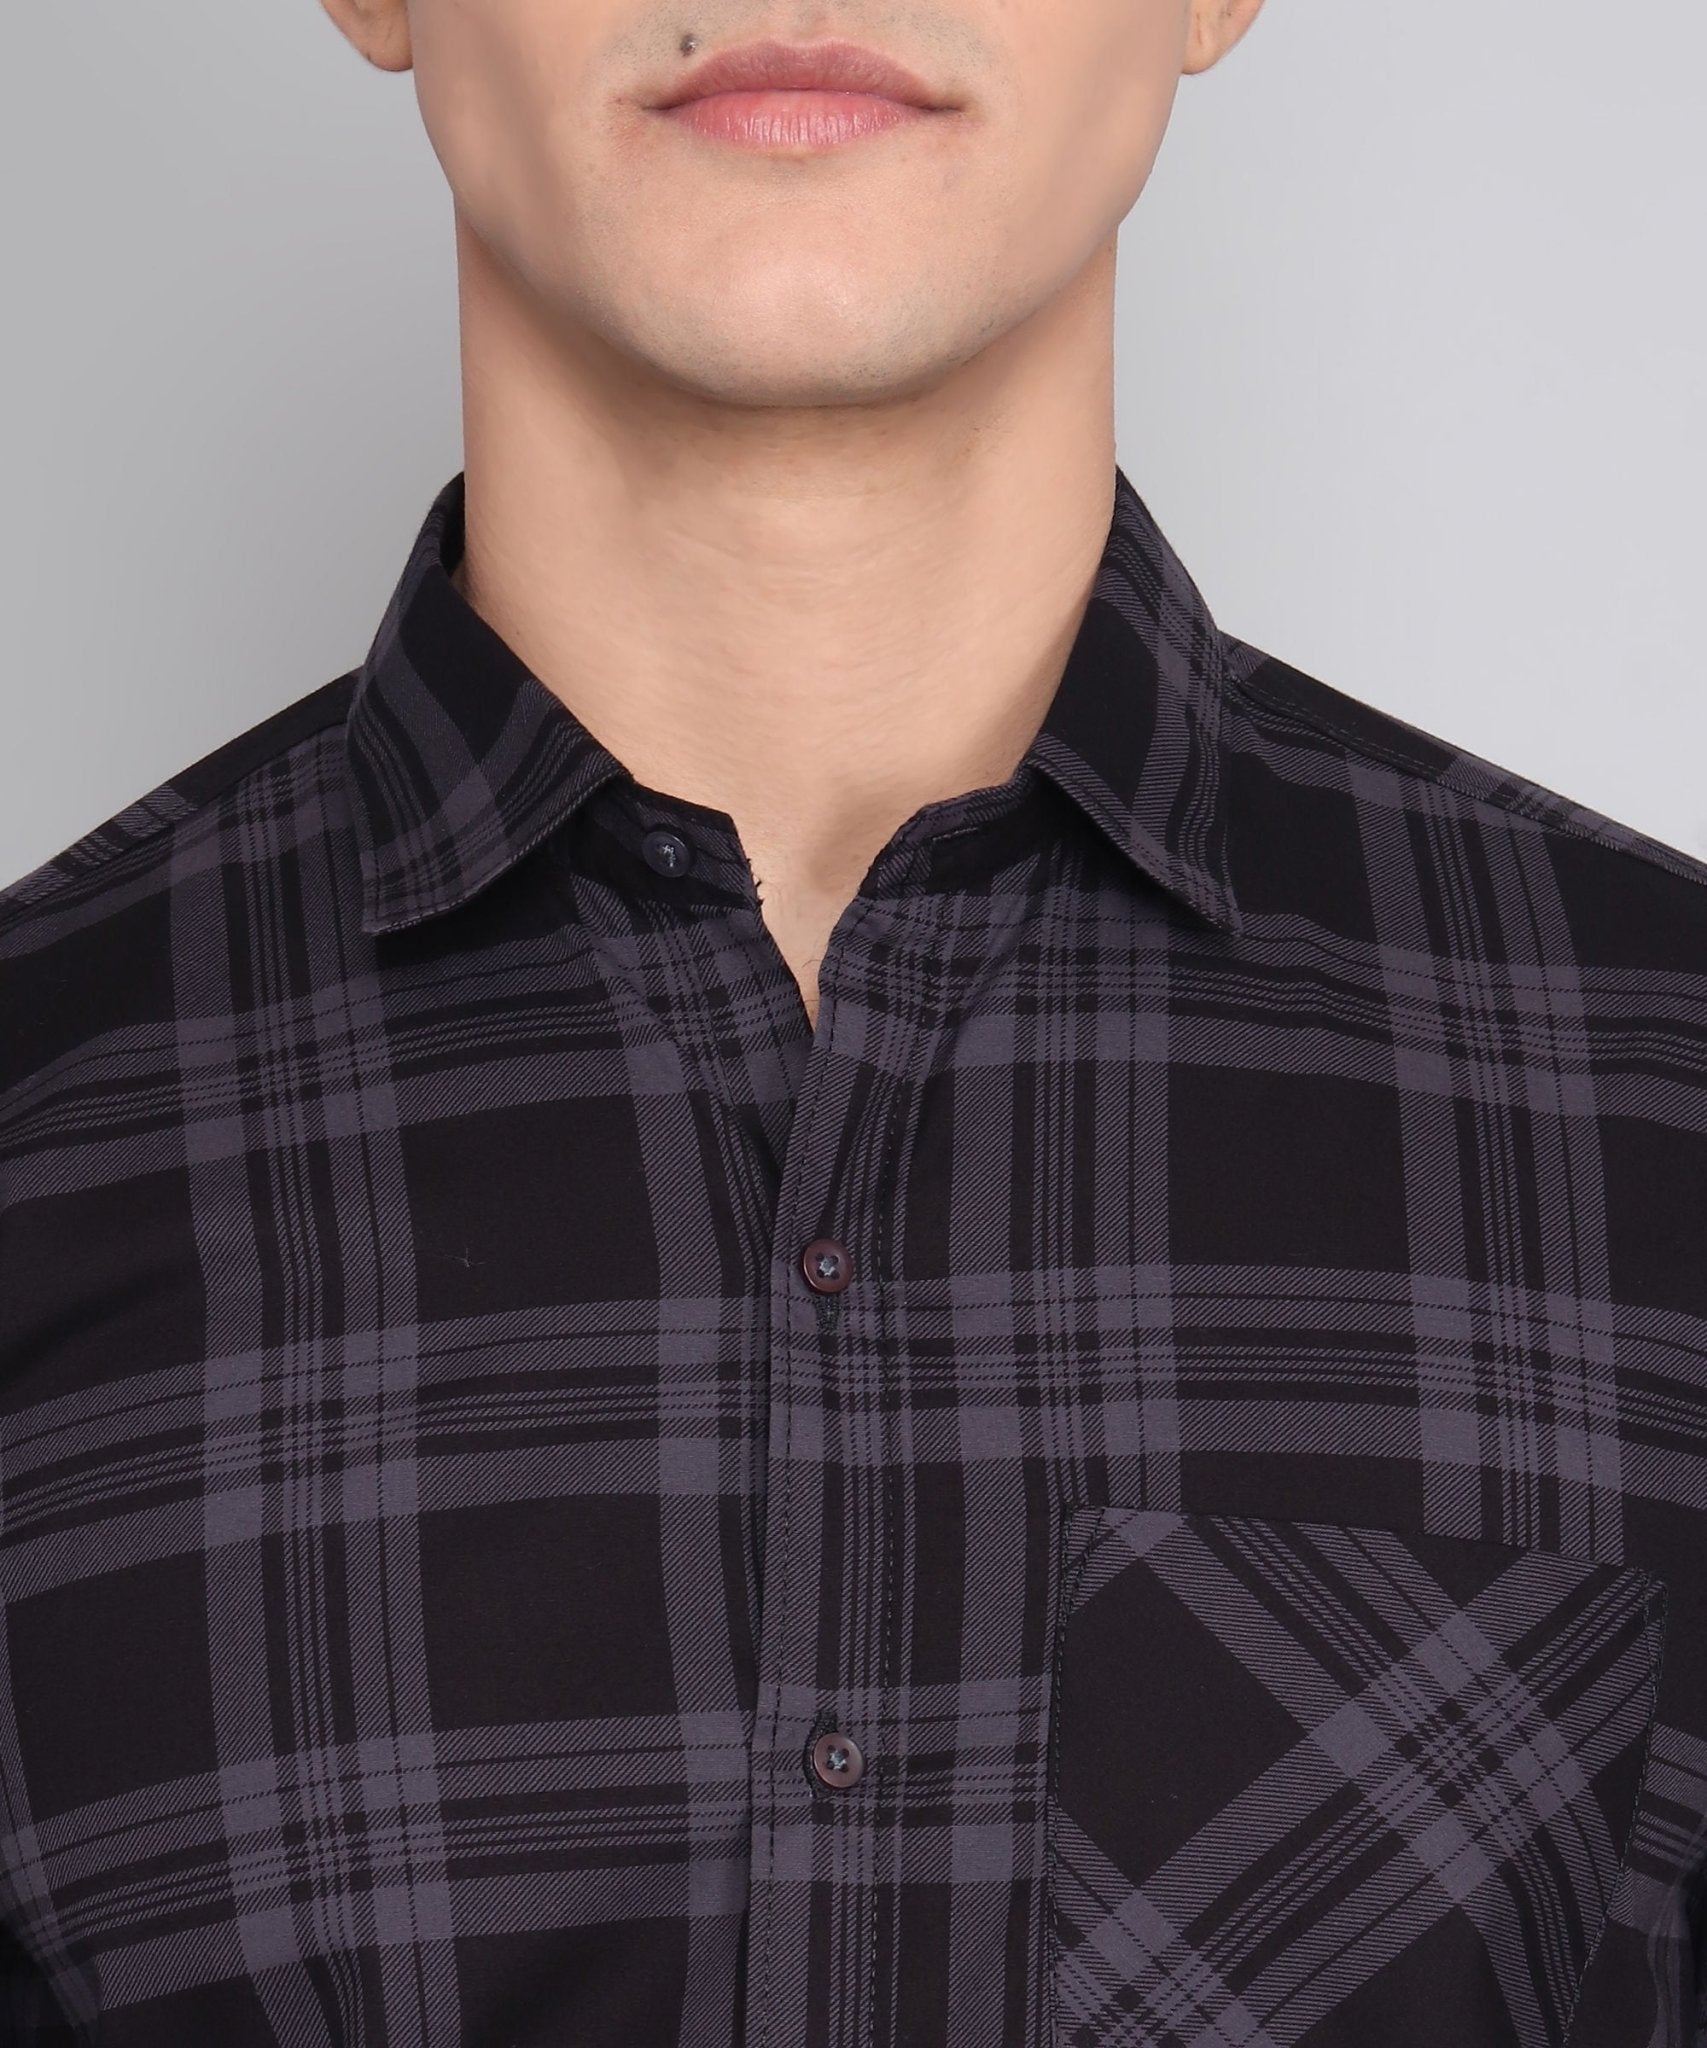 Exclusive TryBuy Premium Black Grey Check Cotton Casual Shirt for Men - TryBuy® USA🇺🇸